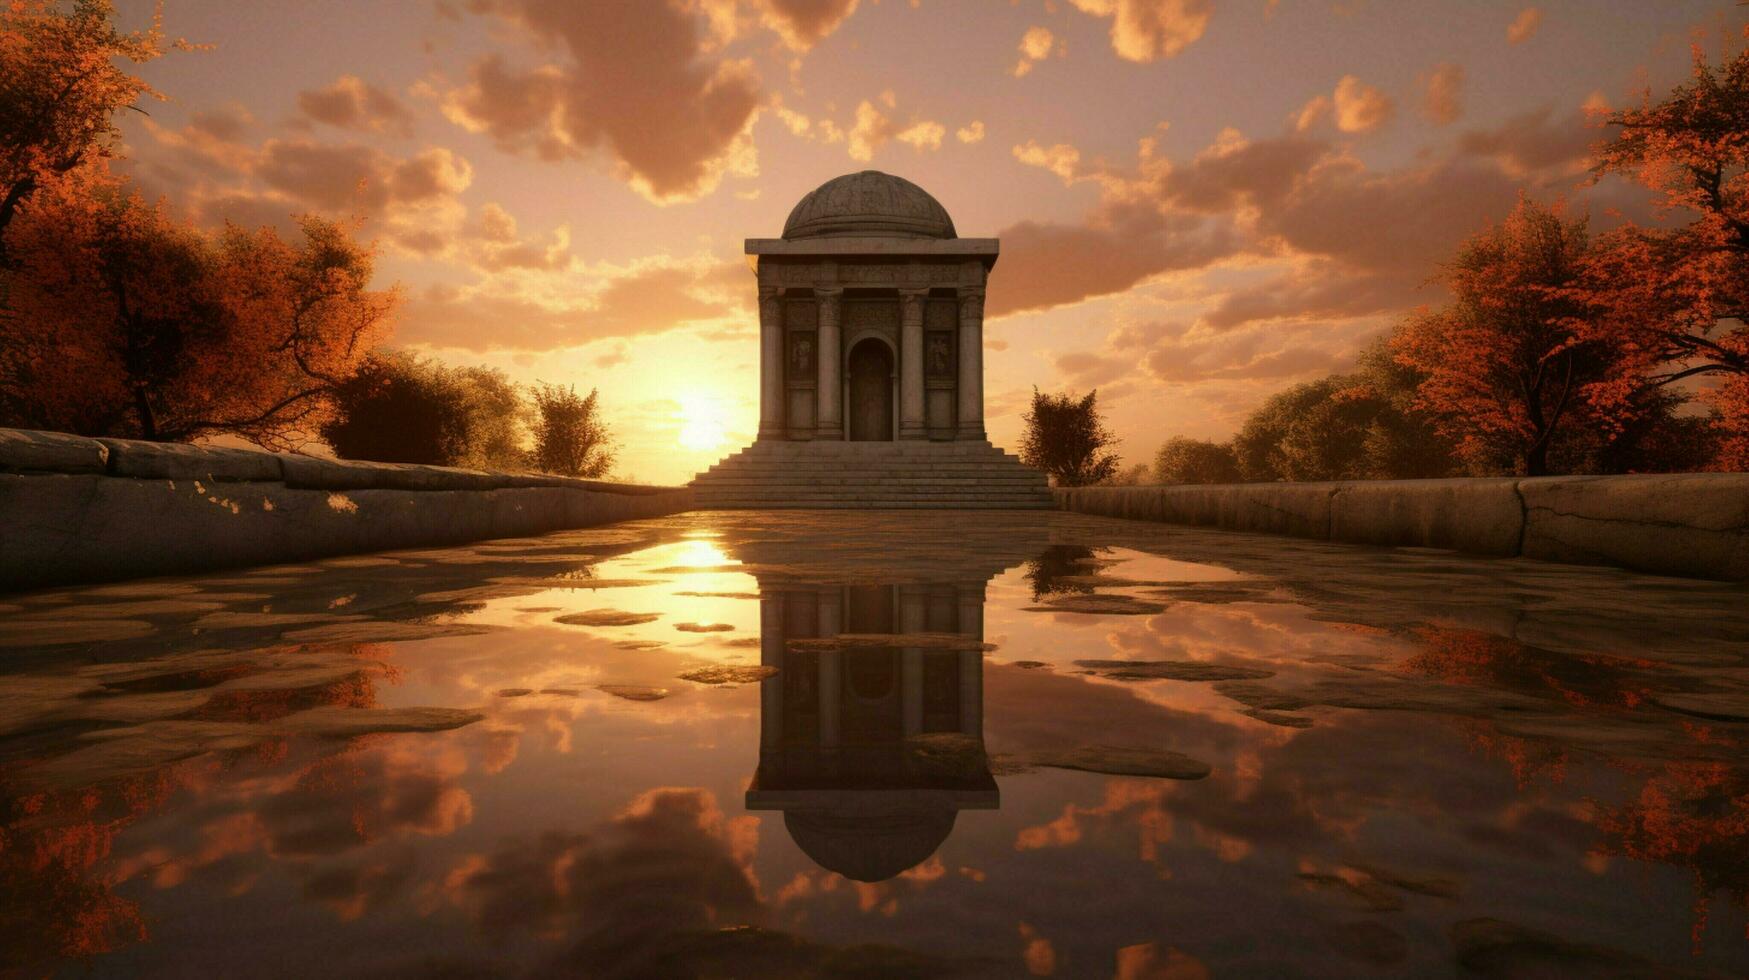 sunset reflection on ancient mausoleum marble tomb photo